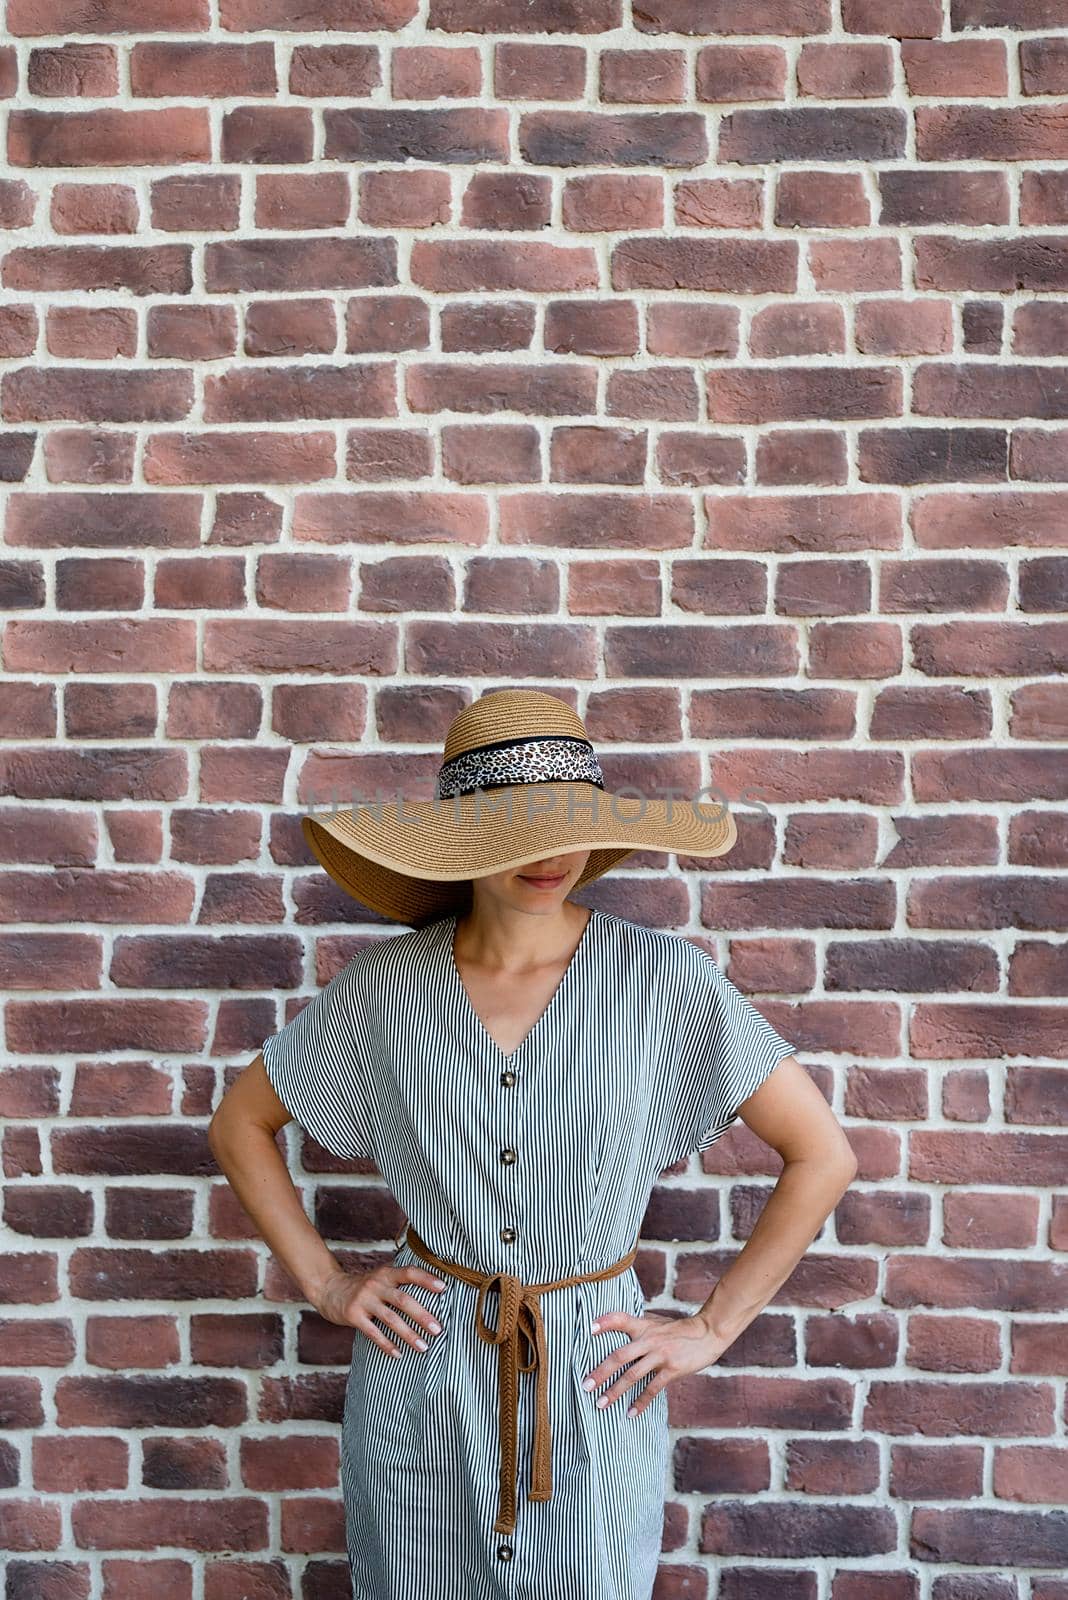 Summer style. Portrait of a beautiful young woman in summer dress and hat standing on red brick wall background